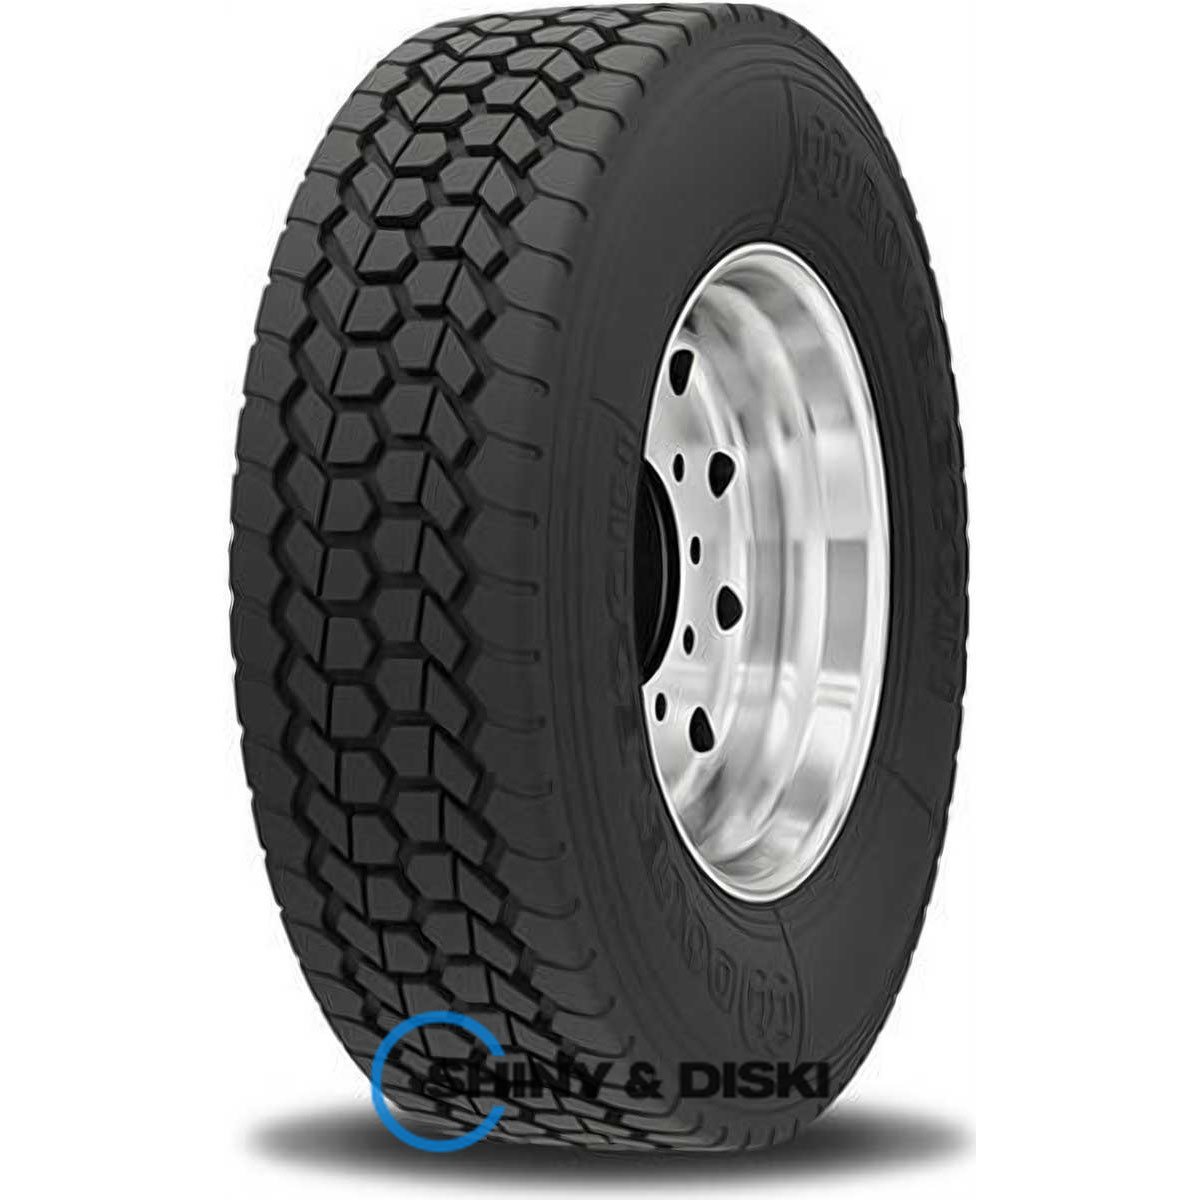 double coin rlb490 (ведущая ось) 265/70 r19.5 143/141k